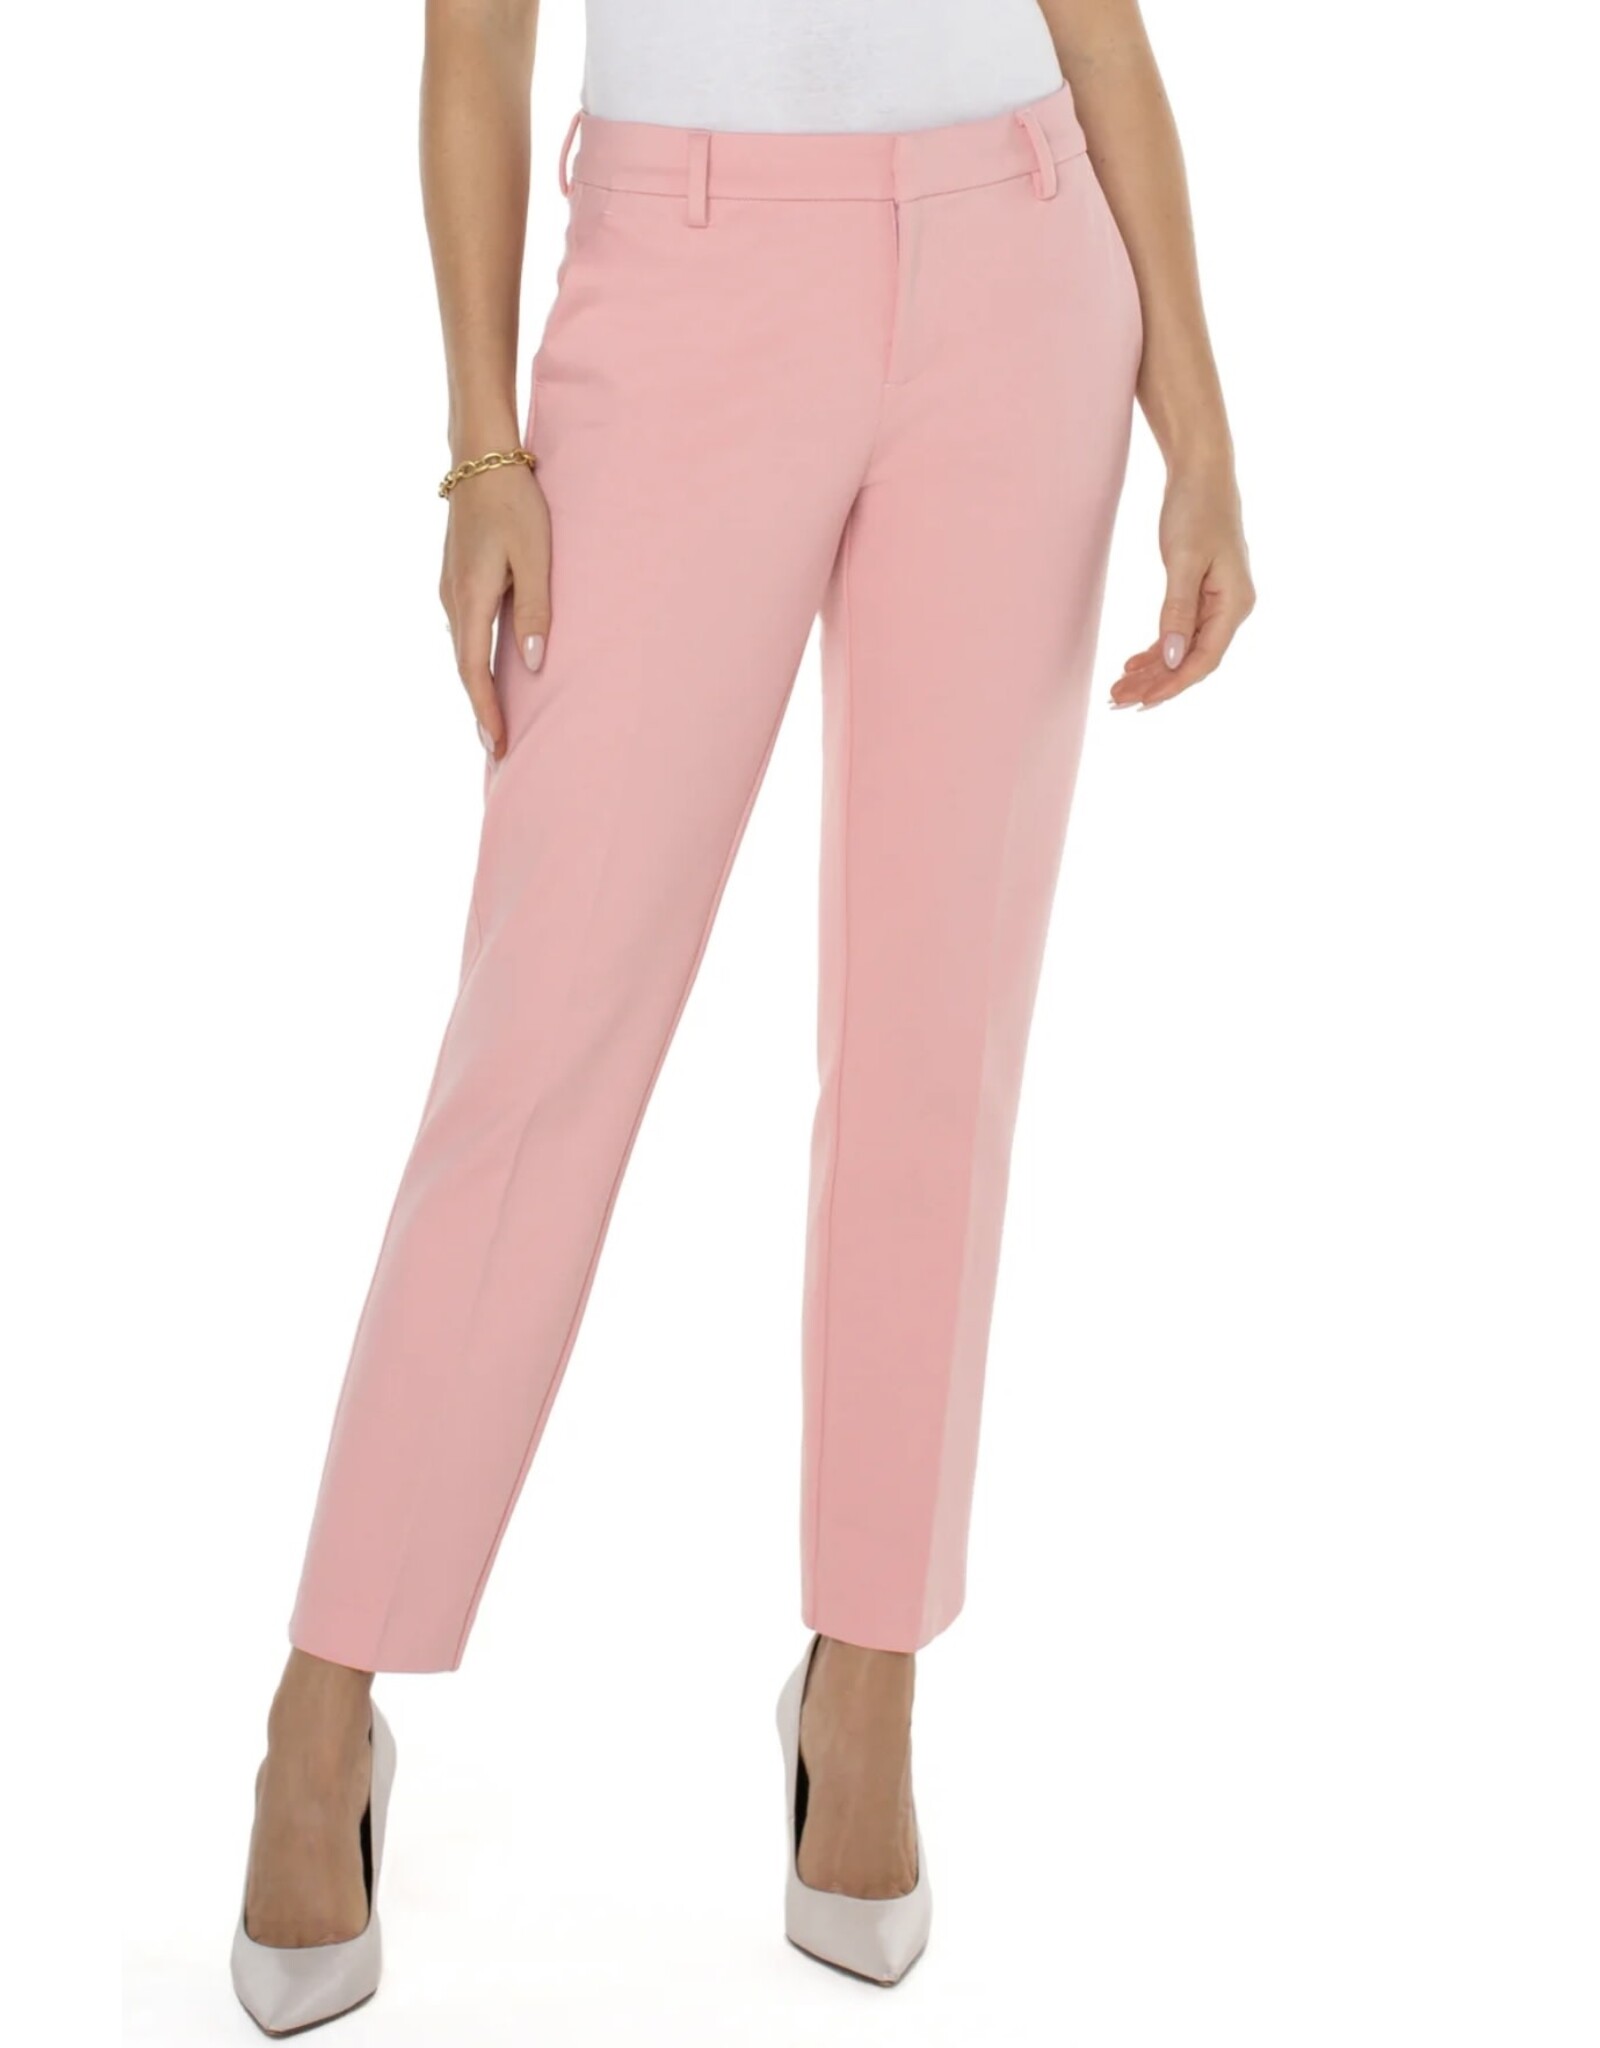 Liverpool Liverpool - Kelsey knit trouser (pink perfection)